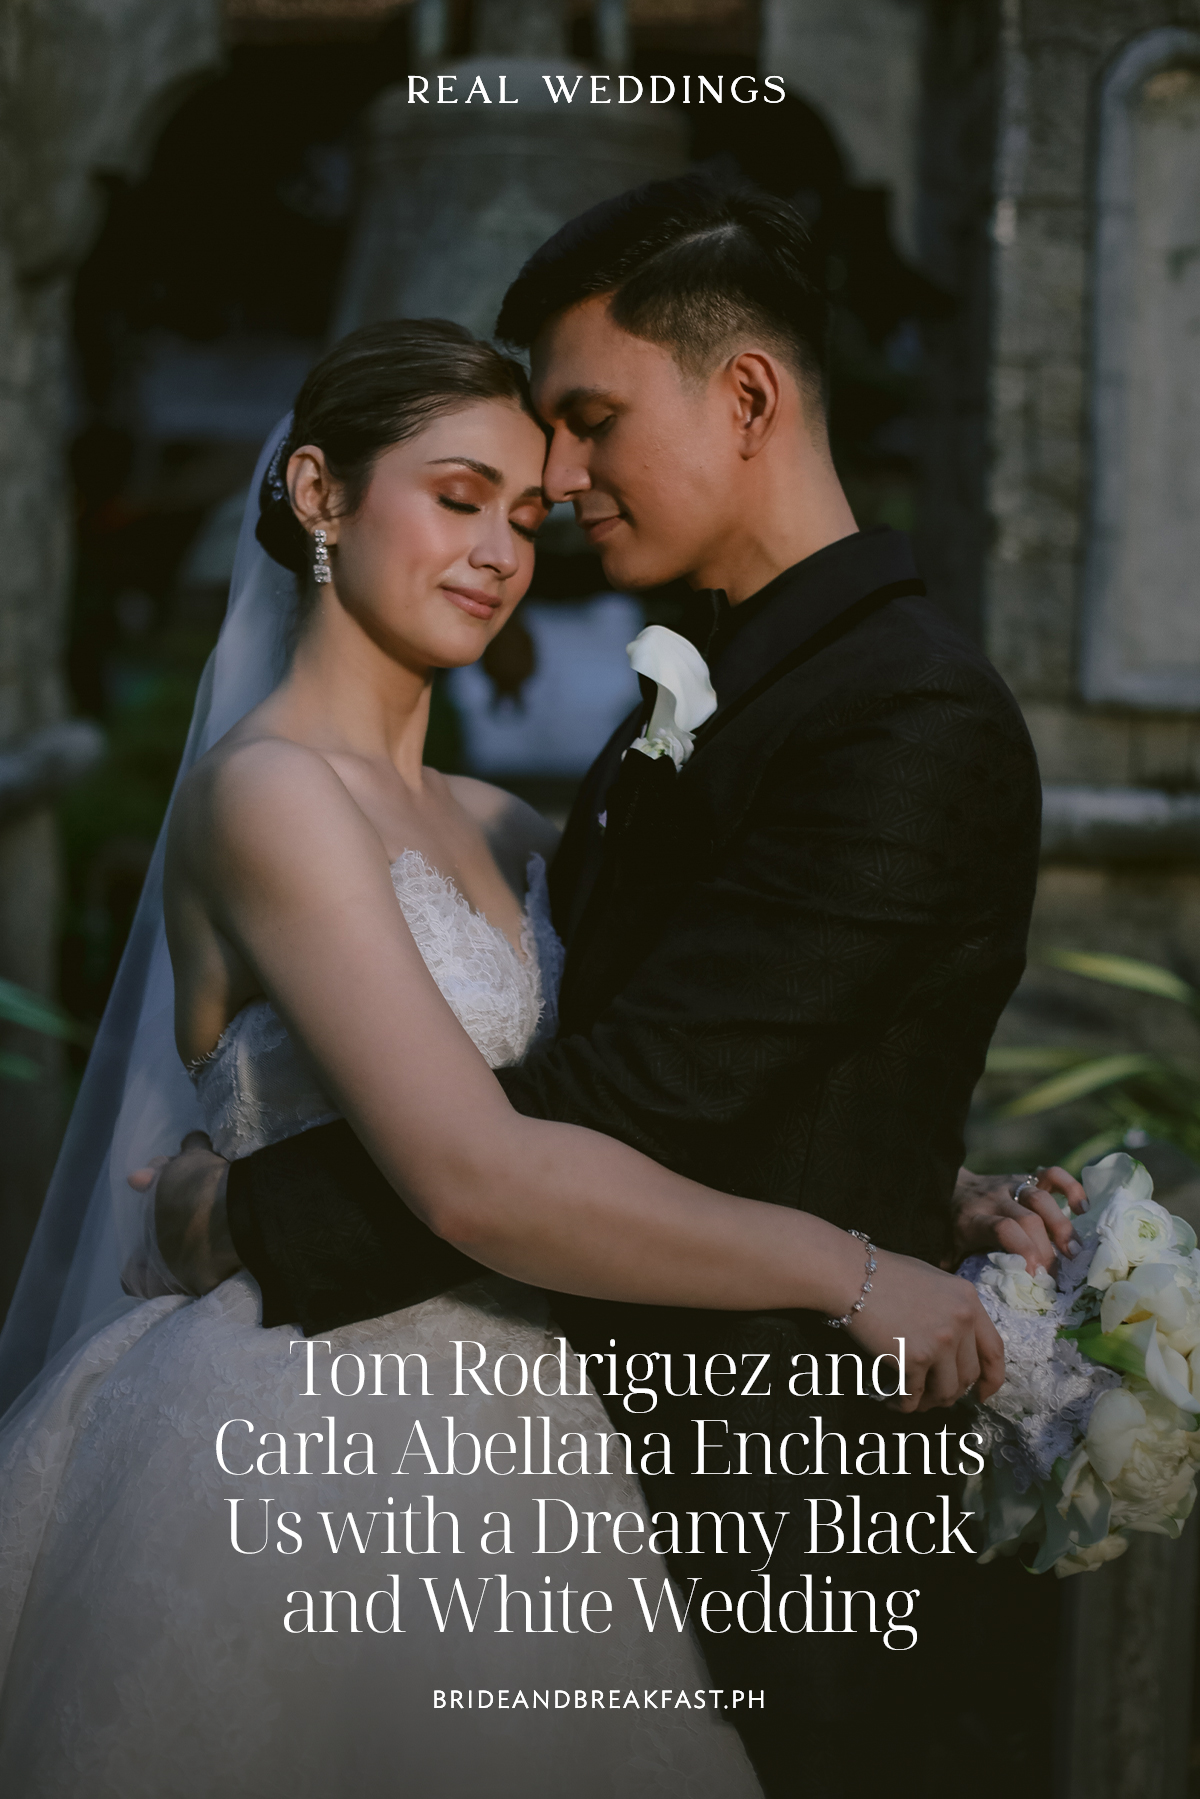 Tom Rodriguez and Carla Abellana Enchants Us with a Dreamy Black and White Wedding